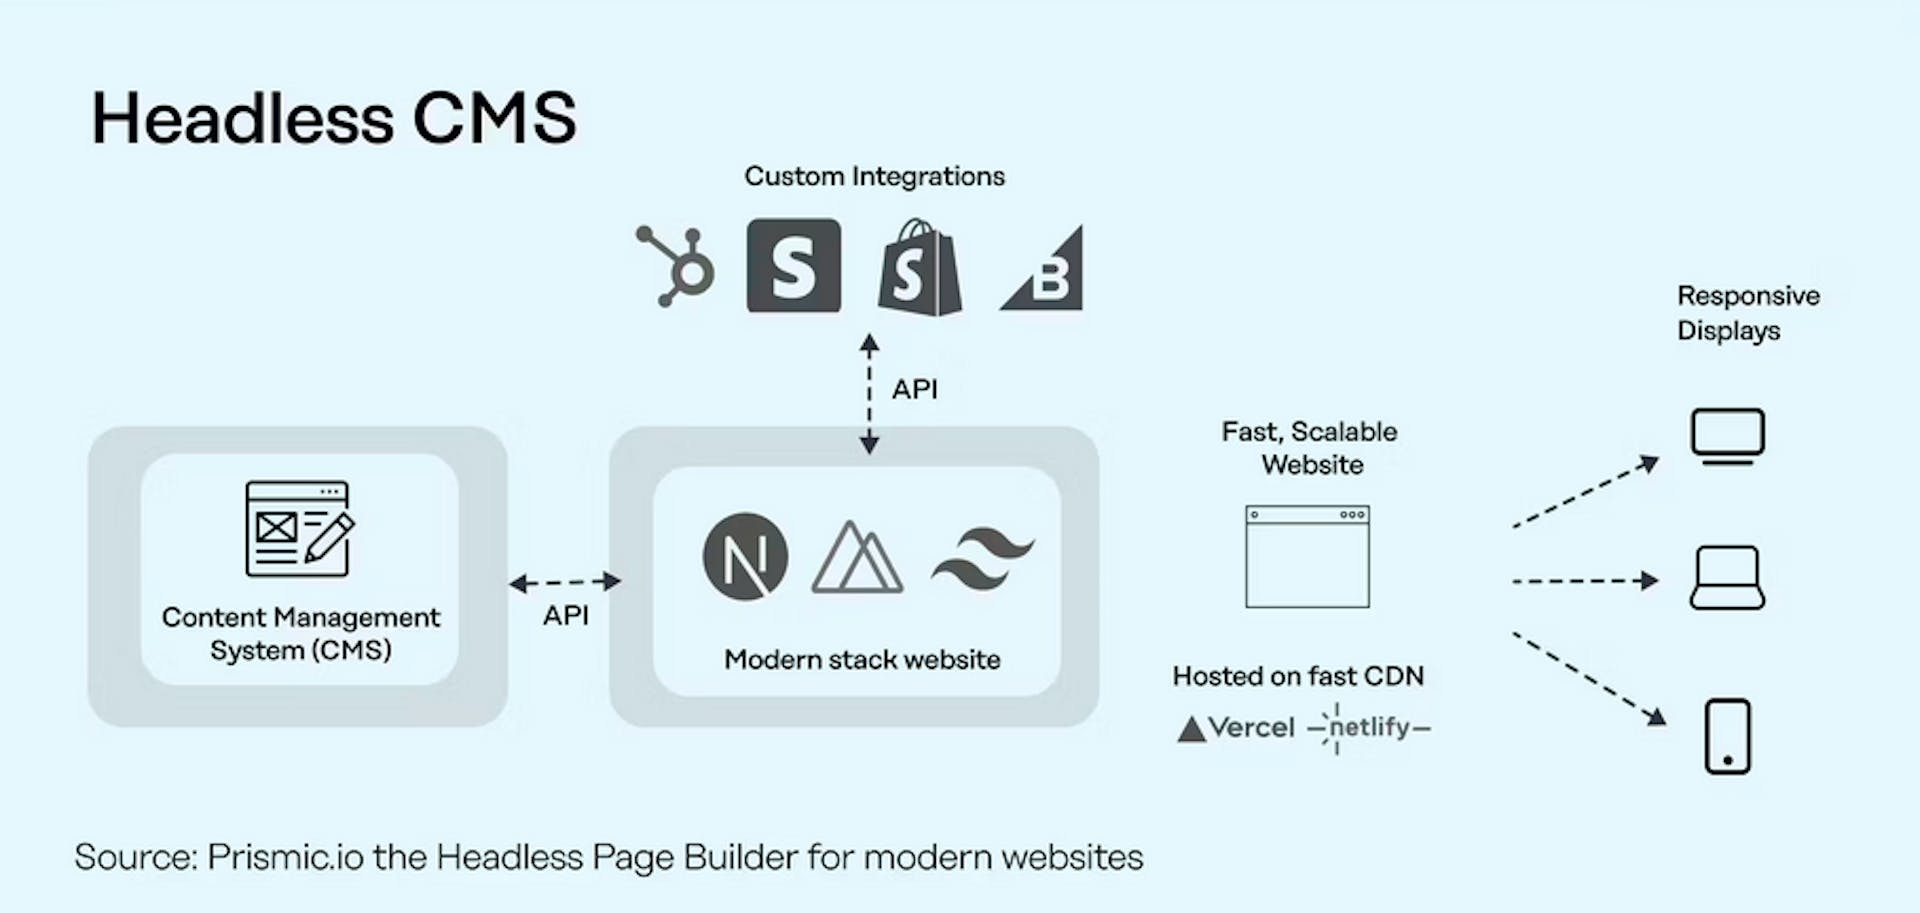 An image of headless CMS architecture 